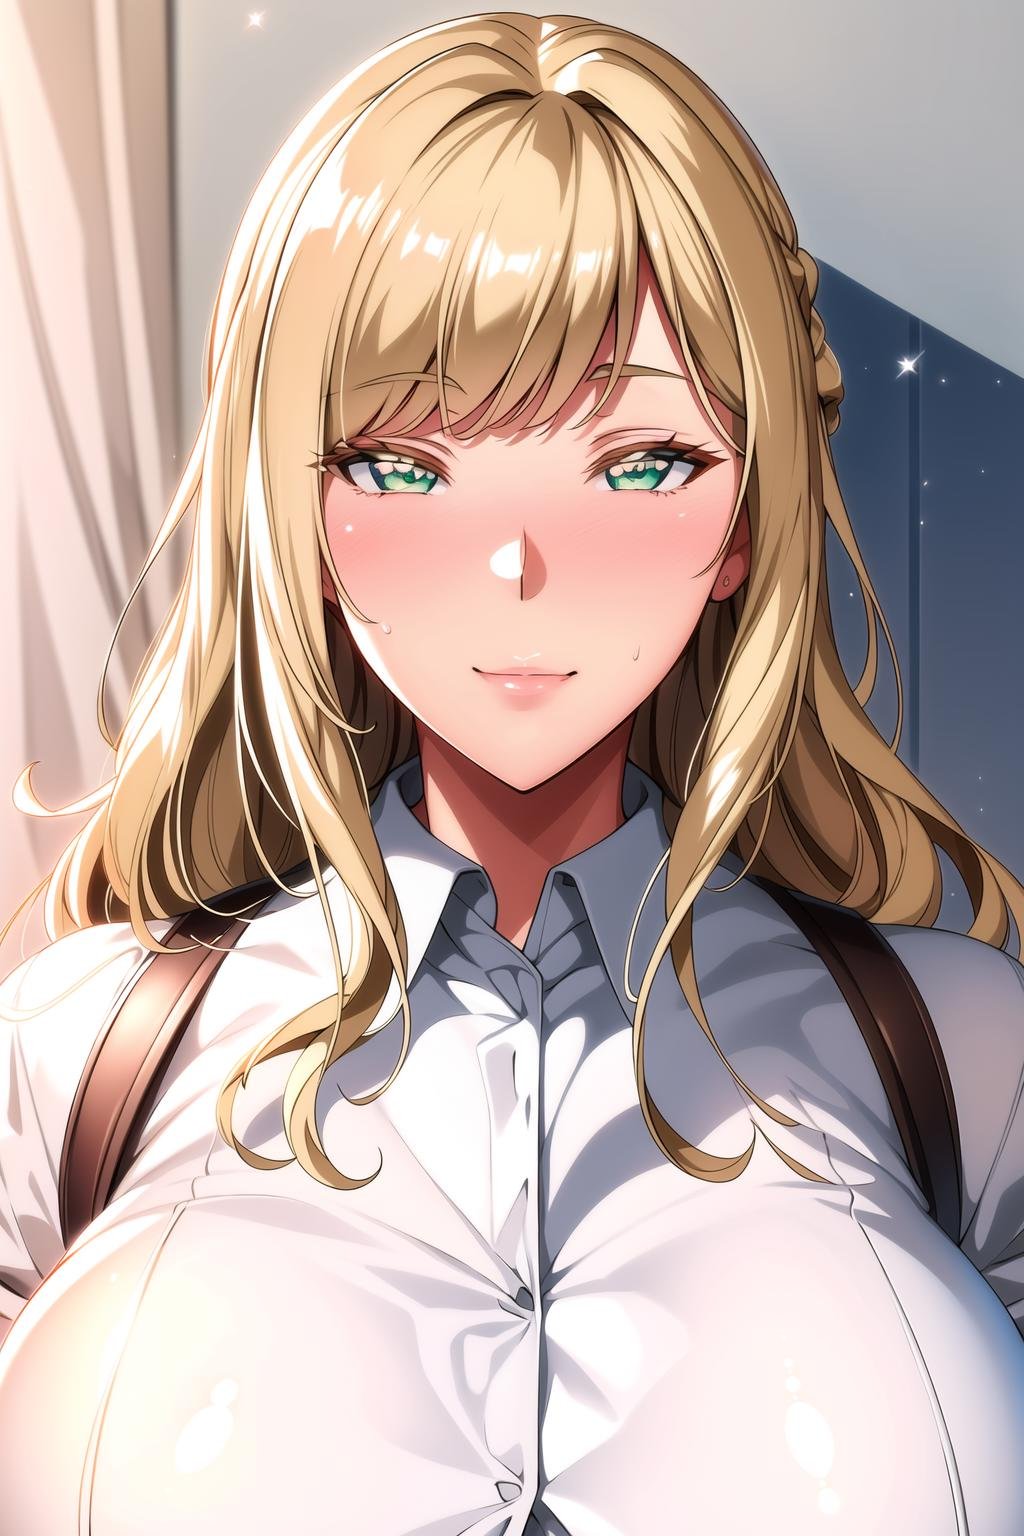 Simple_White_Background,school_uniform,White collared shirt, pleated skirt, red_bowtie,<lora:LouisaRichter-V1:0.7>,blonde hair ,green eyes,bangs,<lora:Mariana_Luciano_NON_VIRGIN-KK77-V1:0.3>,<lora:more_details:0.1>,1 girl, 20yo,Young female,Beautiful Finger,Beautiful long legs,Beautiful body,Beautiful Nose,Beautiful character design, perfect eyes, perfect face,expressive eyes,perfect balance,looking at viewer,(Focus on her face),closed mouth, (innocent_big_eyes:1.0),Light_Smile,official art,extremely detailed CG unity 8k wallpaper, perfect lighting,Colorful, Bright_Front_face_Lighting,shiny skin, (masterpiece:1.0),(best_quality:1.0), ultra high res,4K,ultra-detailed,photography, 8K, HDR, highres, absurdres:1.2, Kodak portra 400, film grain, blurry background, bokeh:1.2, lens flare, (vibrant_color:1.2),professional photograph, (Beautiful,large_Breasts:1.4), (beautiful_face:1.5),(narrow_waist), 